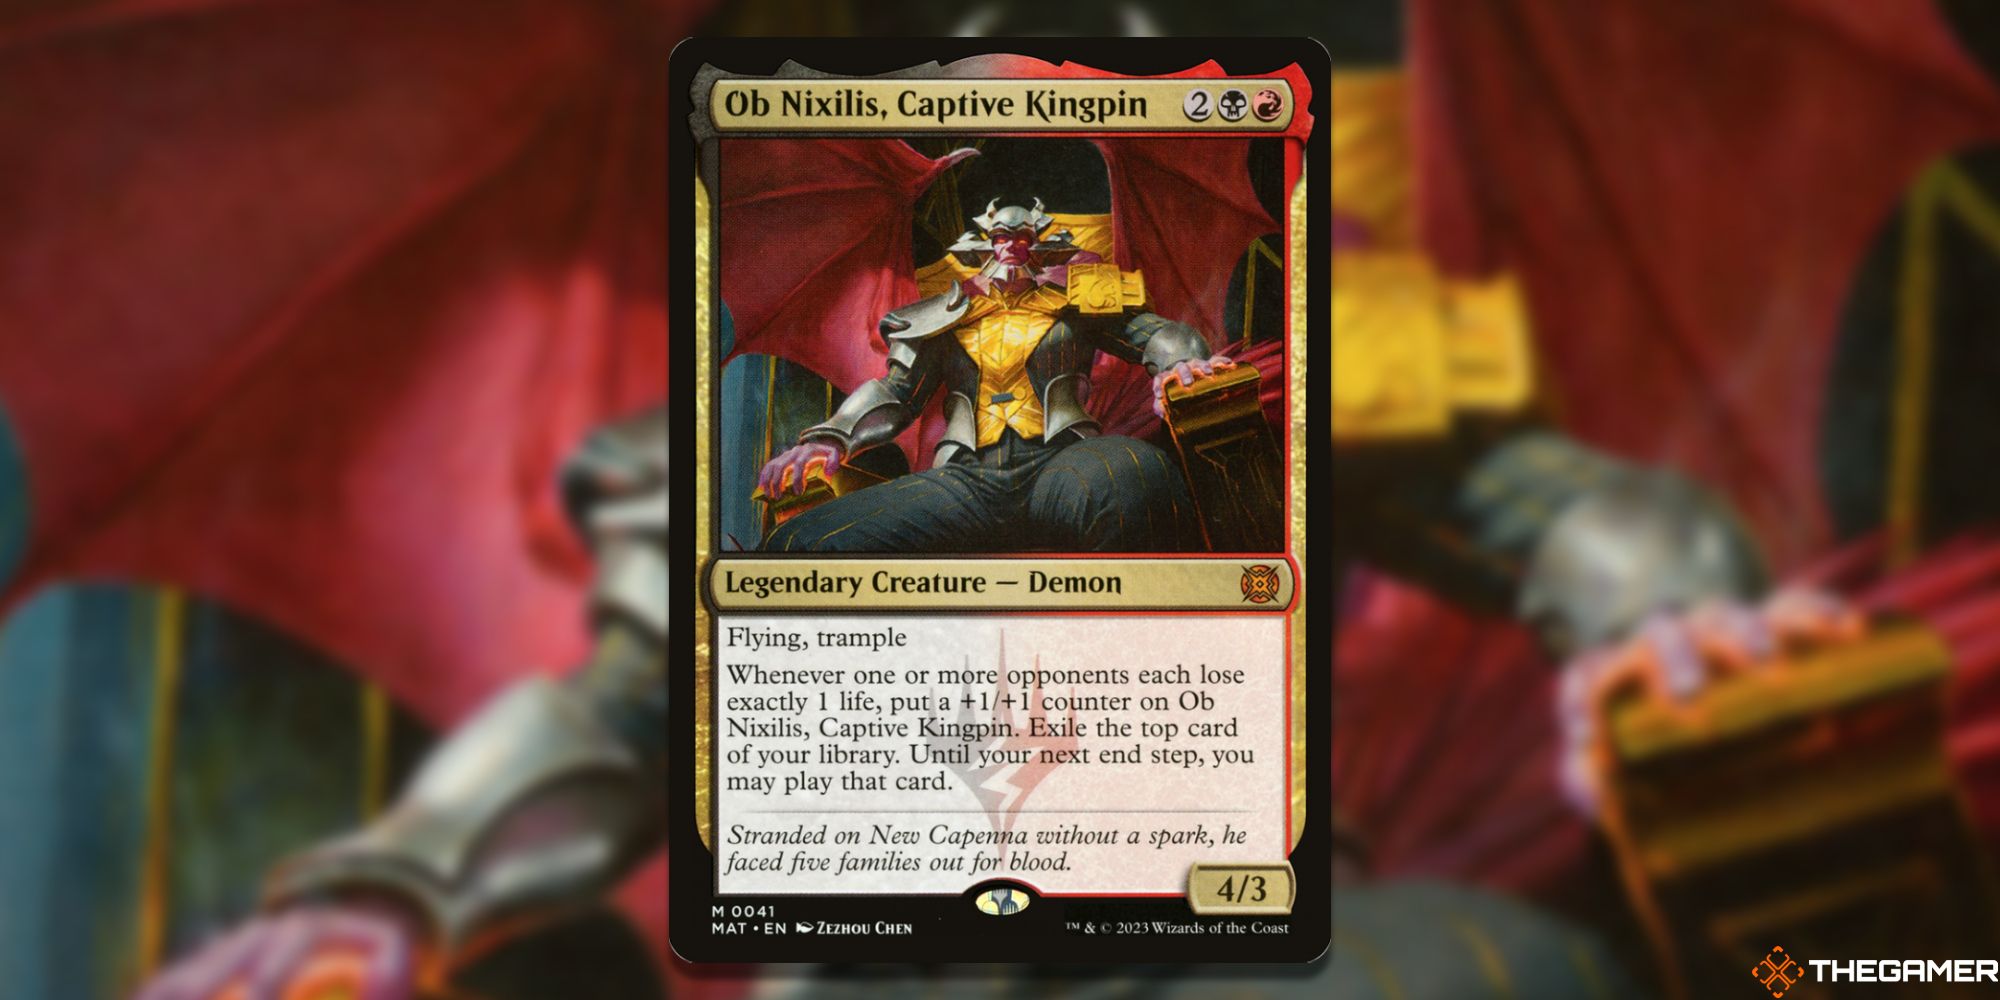 Image of the Ob Nixilis, Captive Kingpin card in Magic: The Gathering, with art by Zezhou Chen